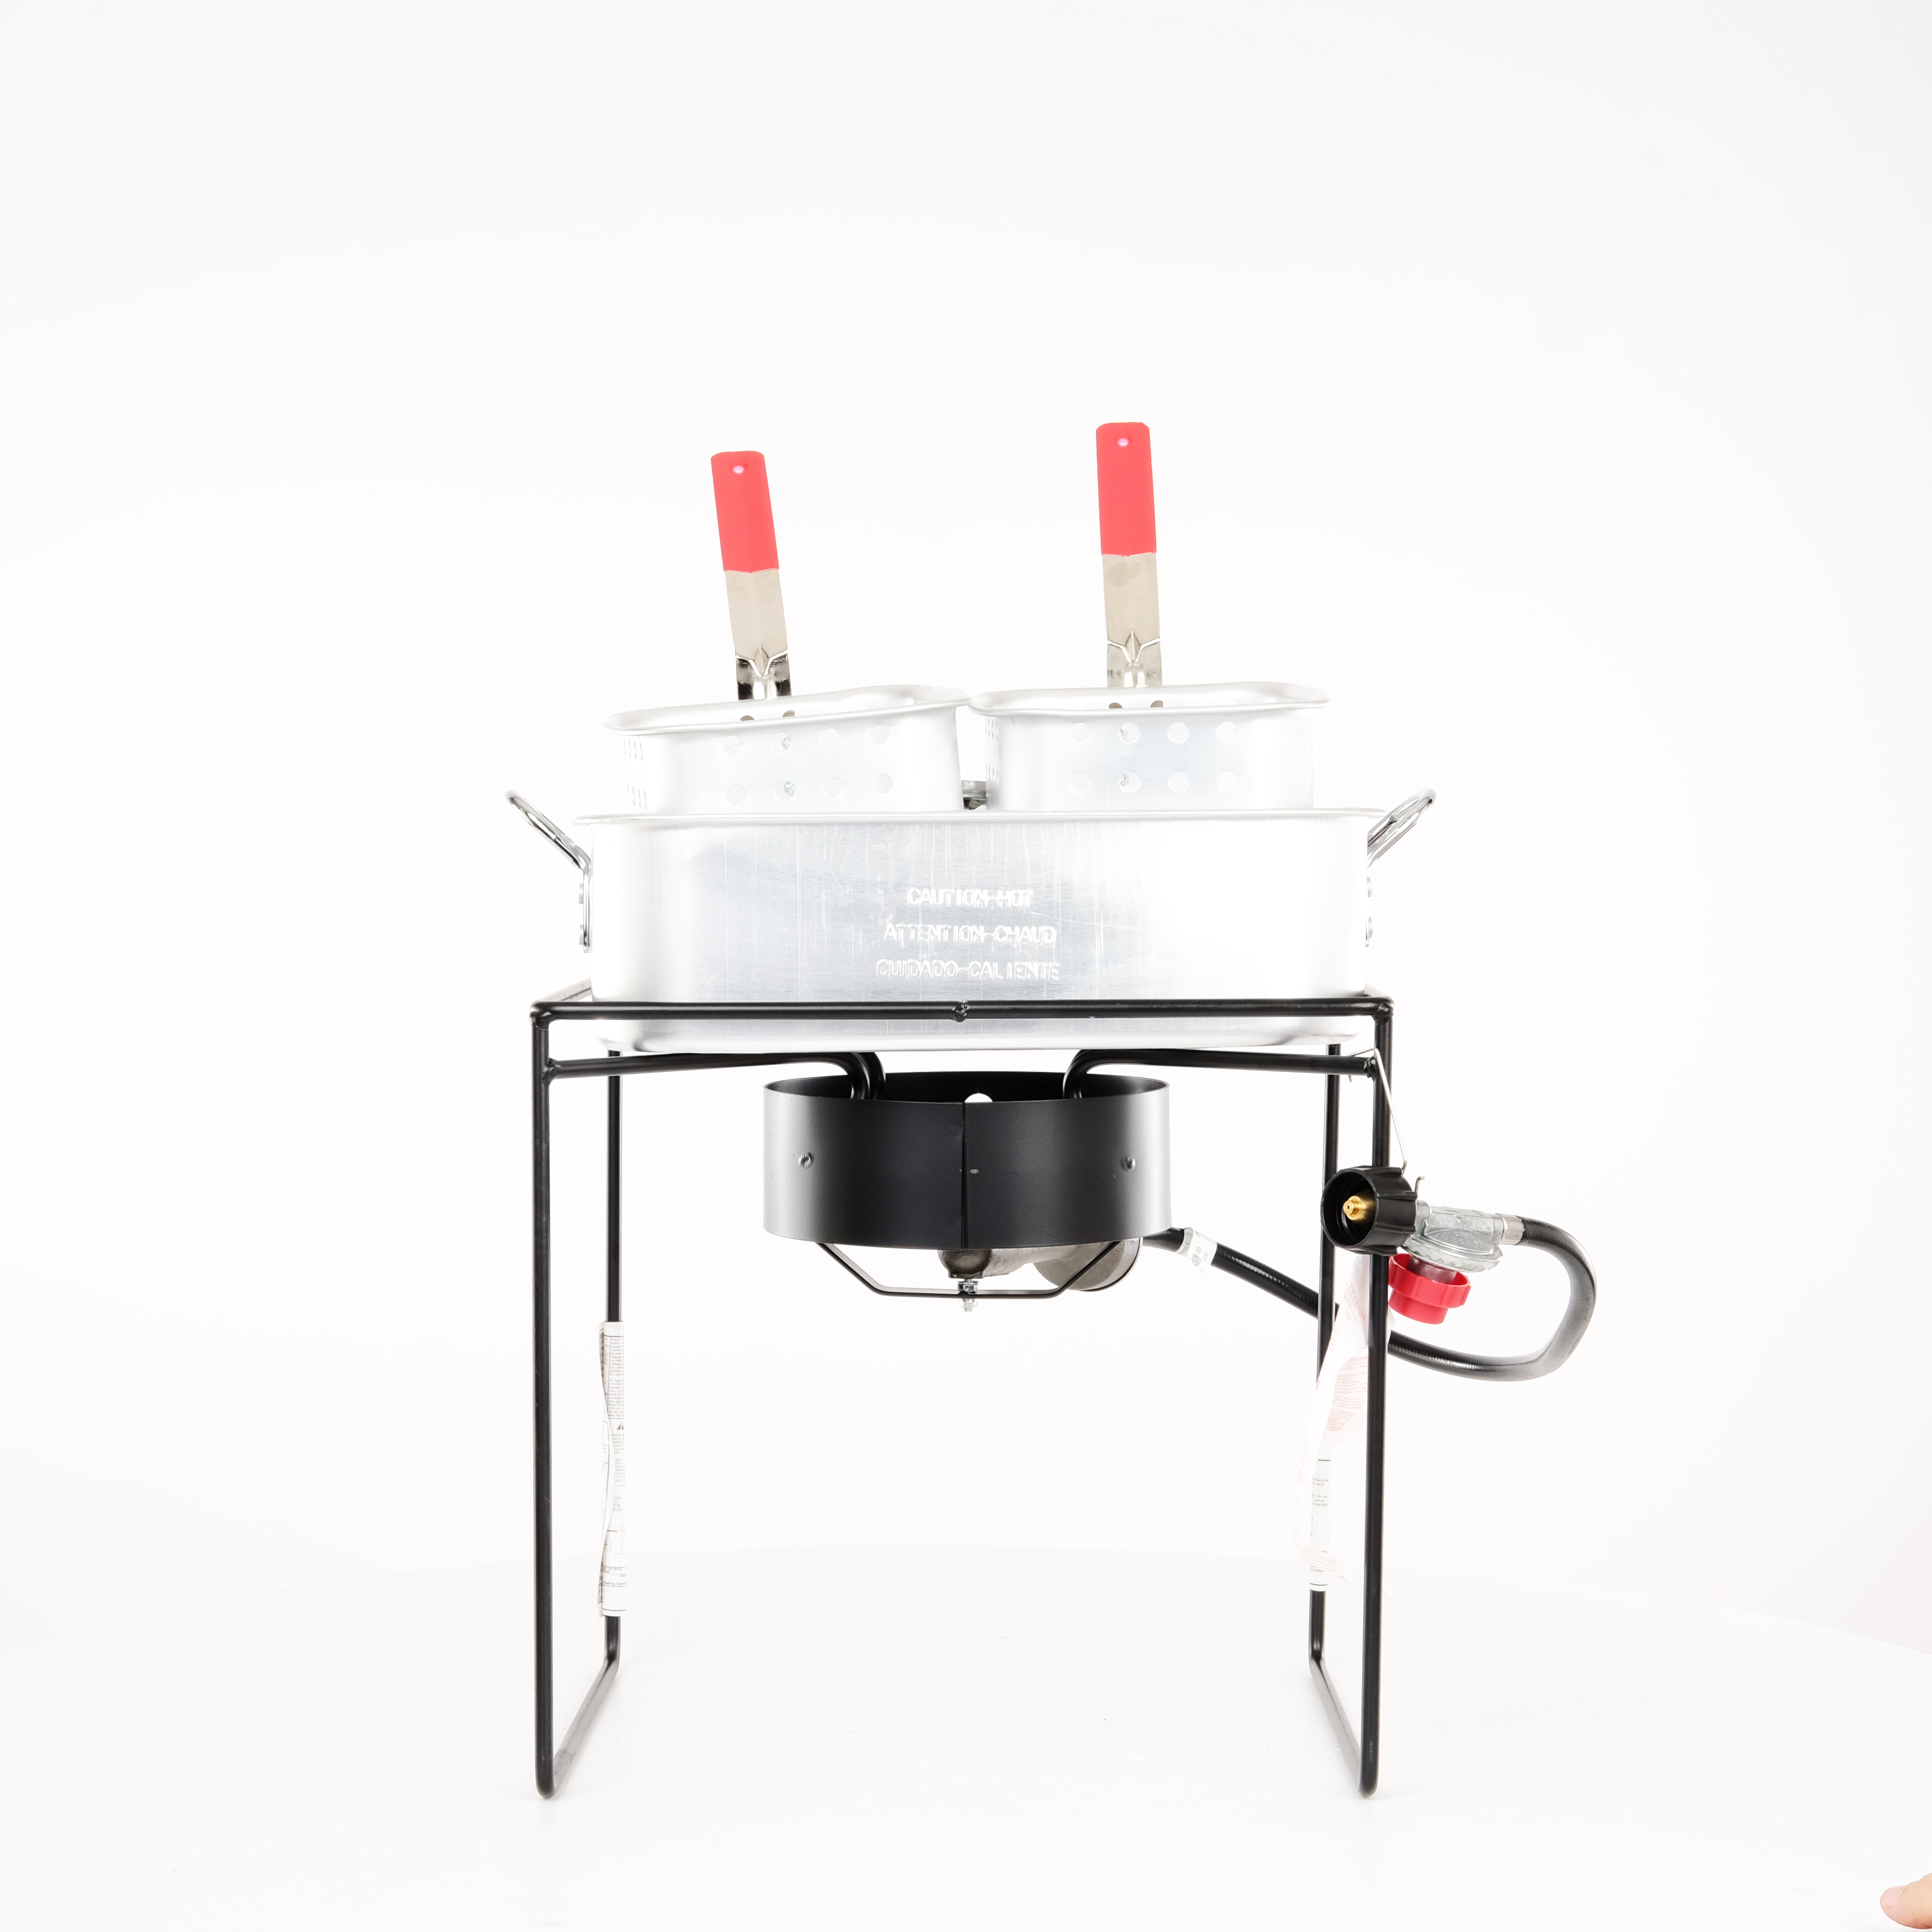 King Kooker Portable 16″ Propane Stove Burner Deep Fryer for Outdoor Cooking with 2 Frying Baskets - image 5 of 9